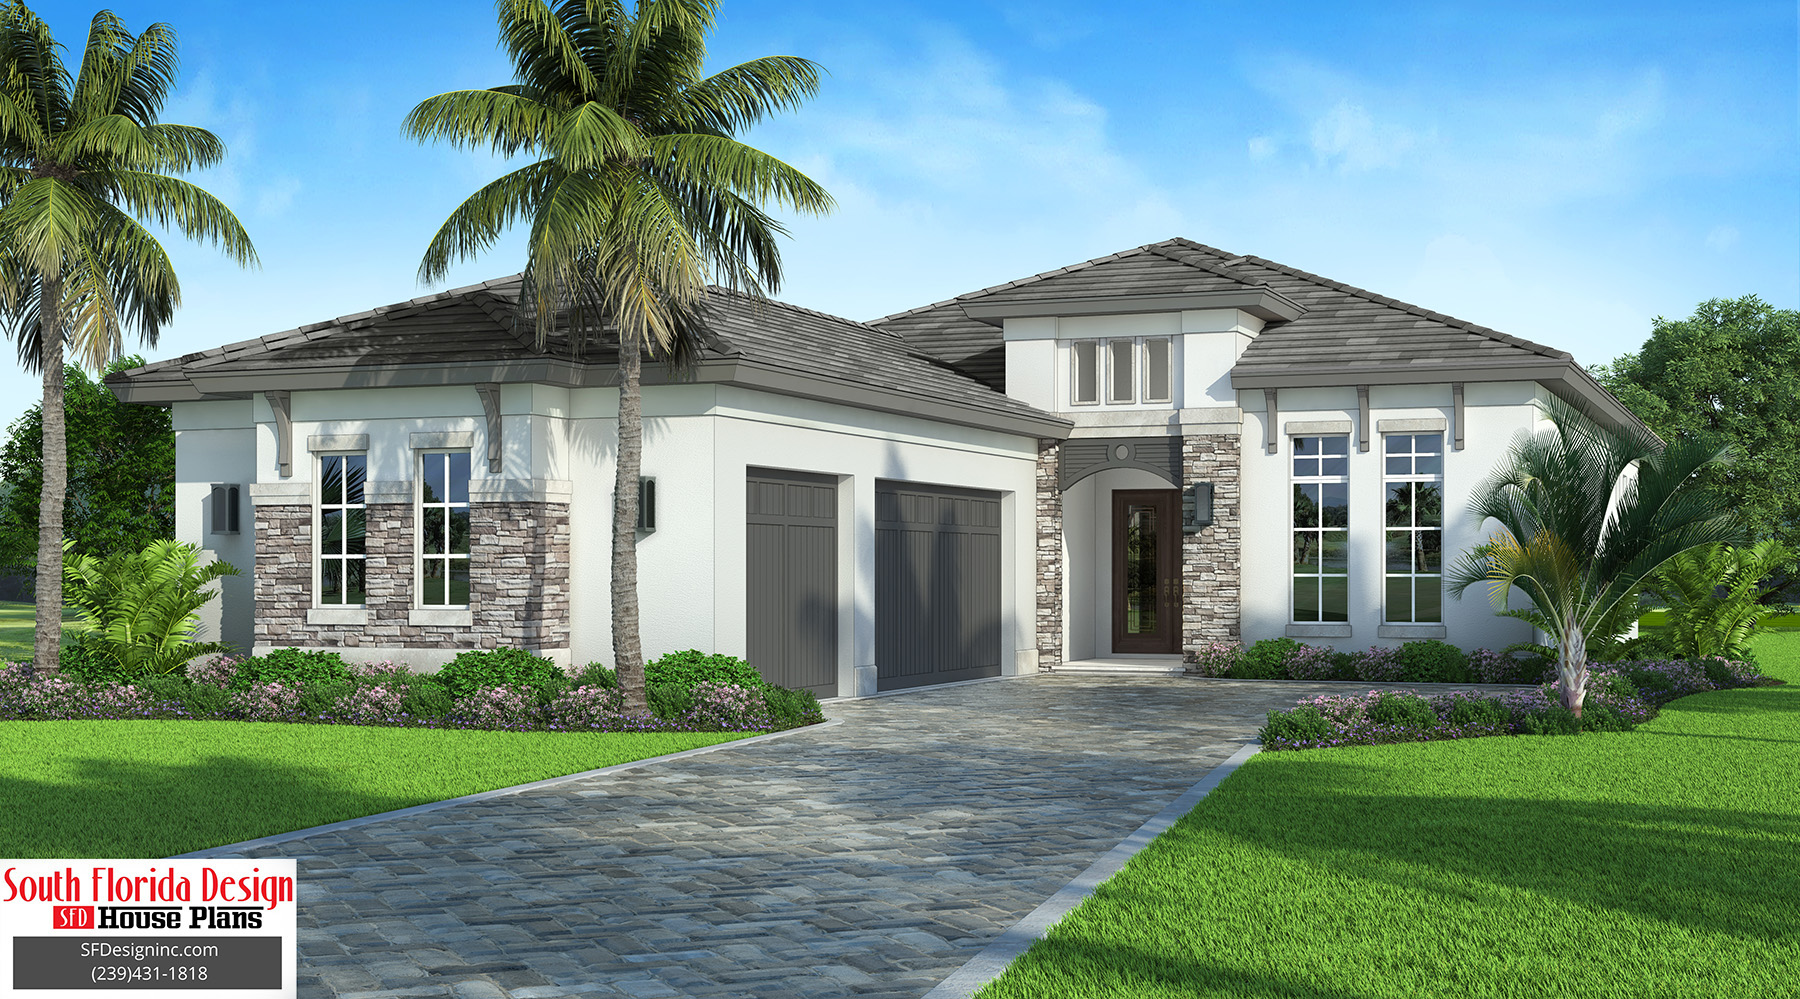 Color front elevation a image of a 3026sf narrow lot house plan